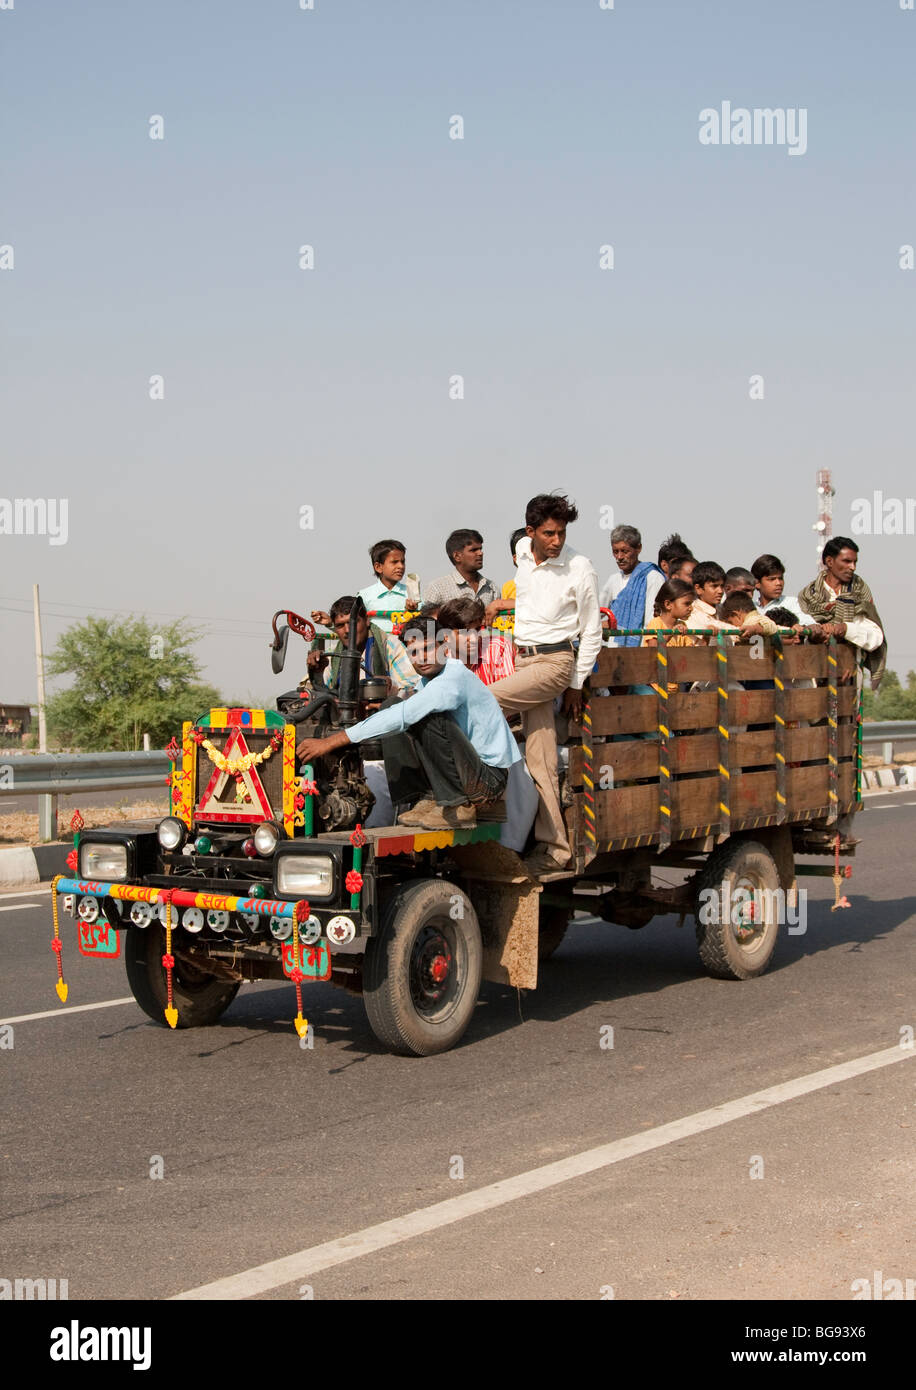 Stock photo of Typical rural transport, overloaded van with people,  Maharashtra, India. Available for sale on